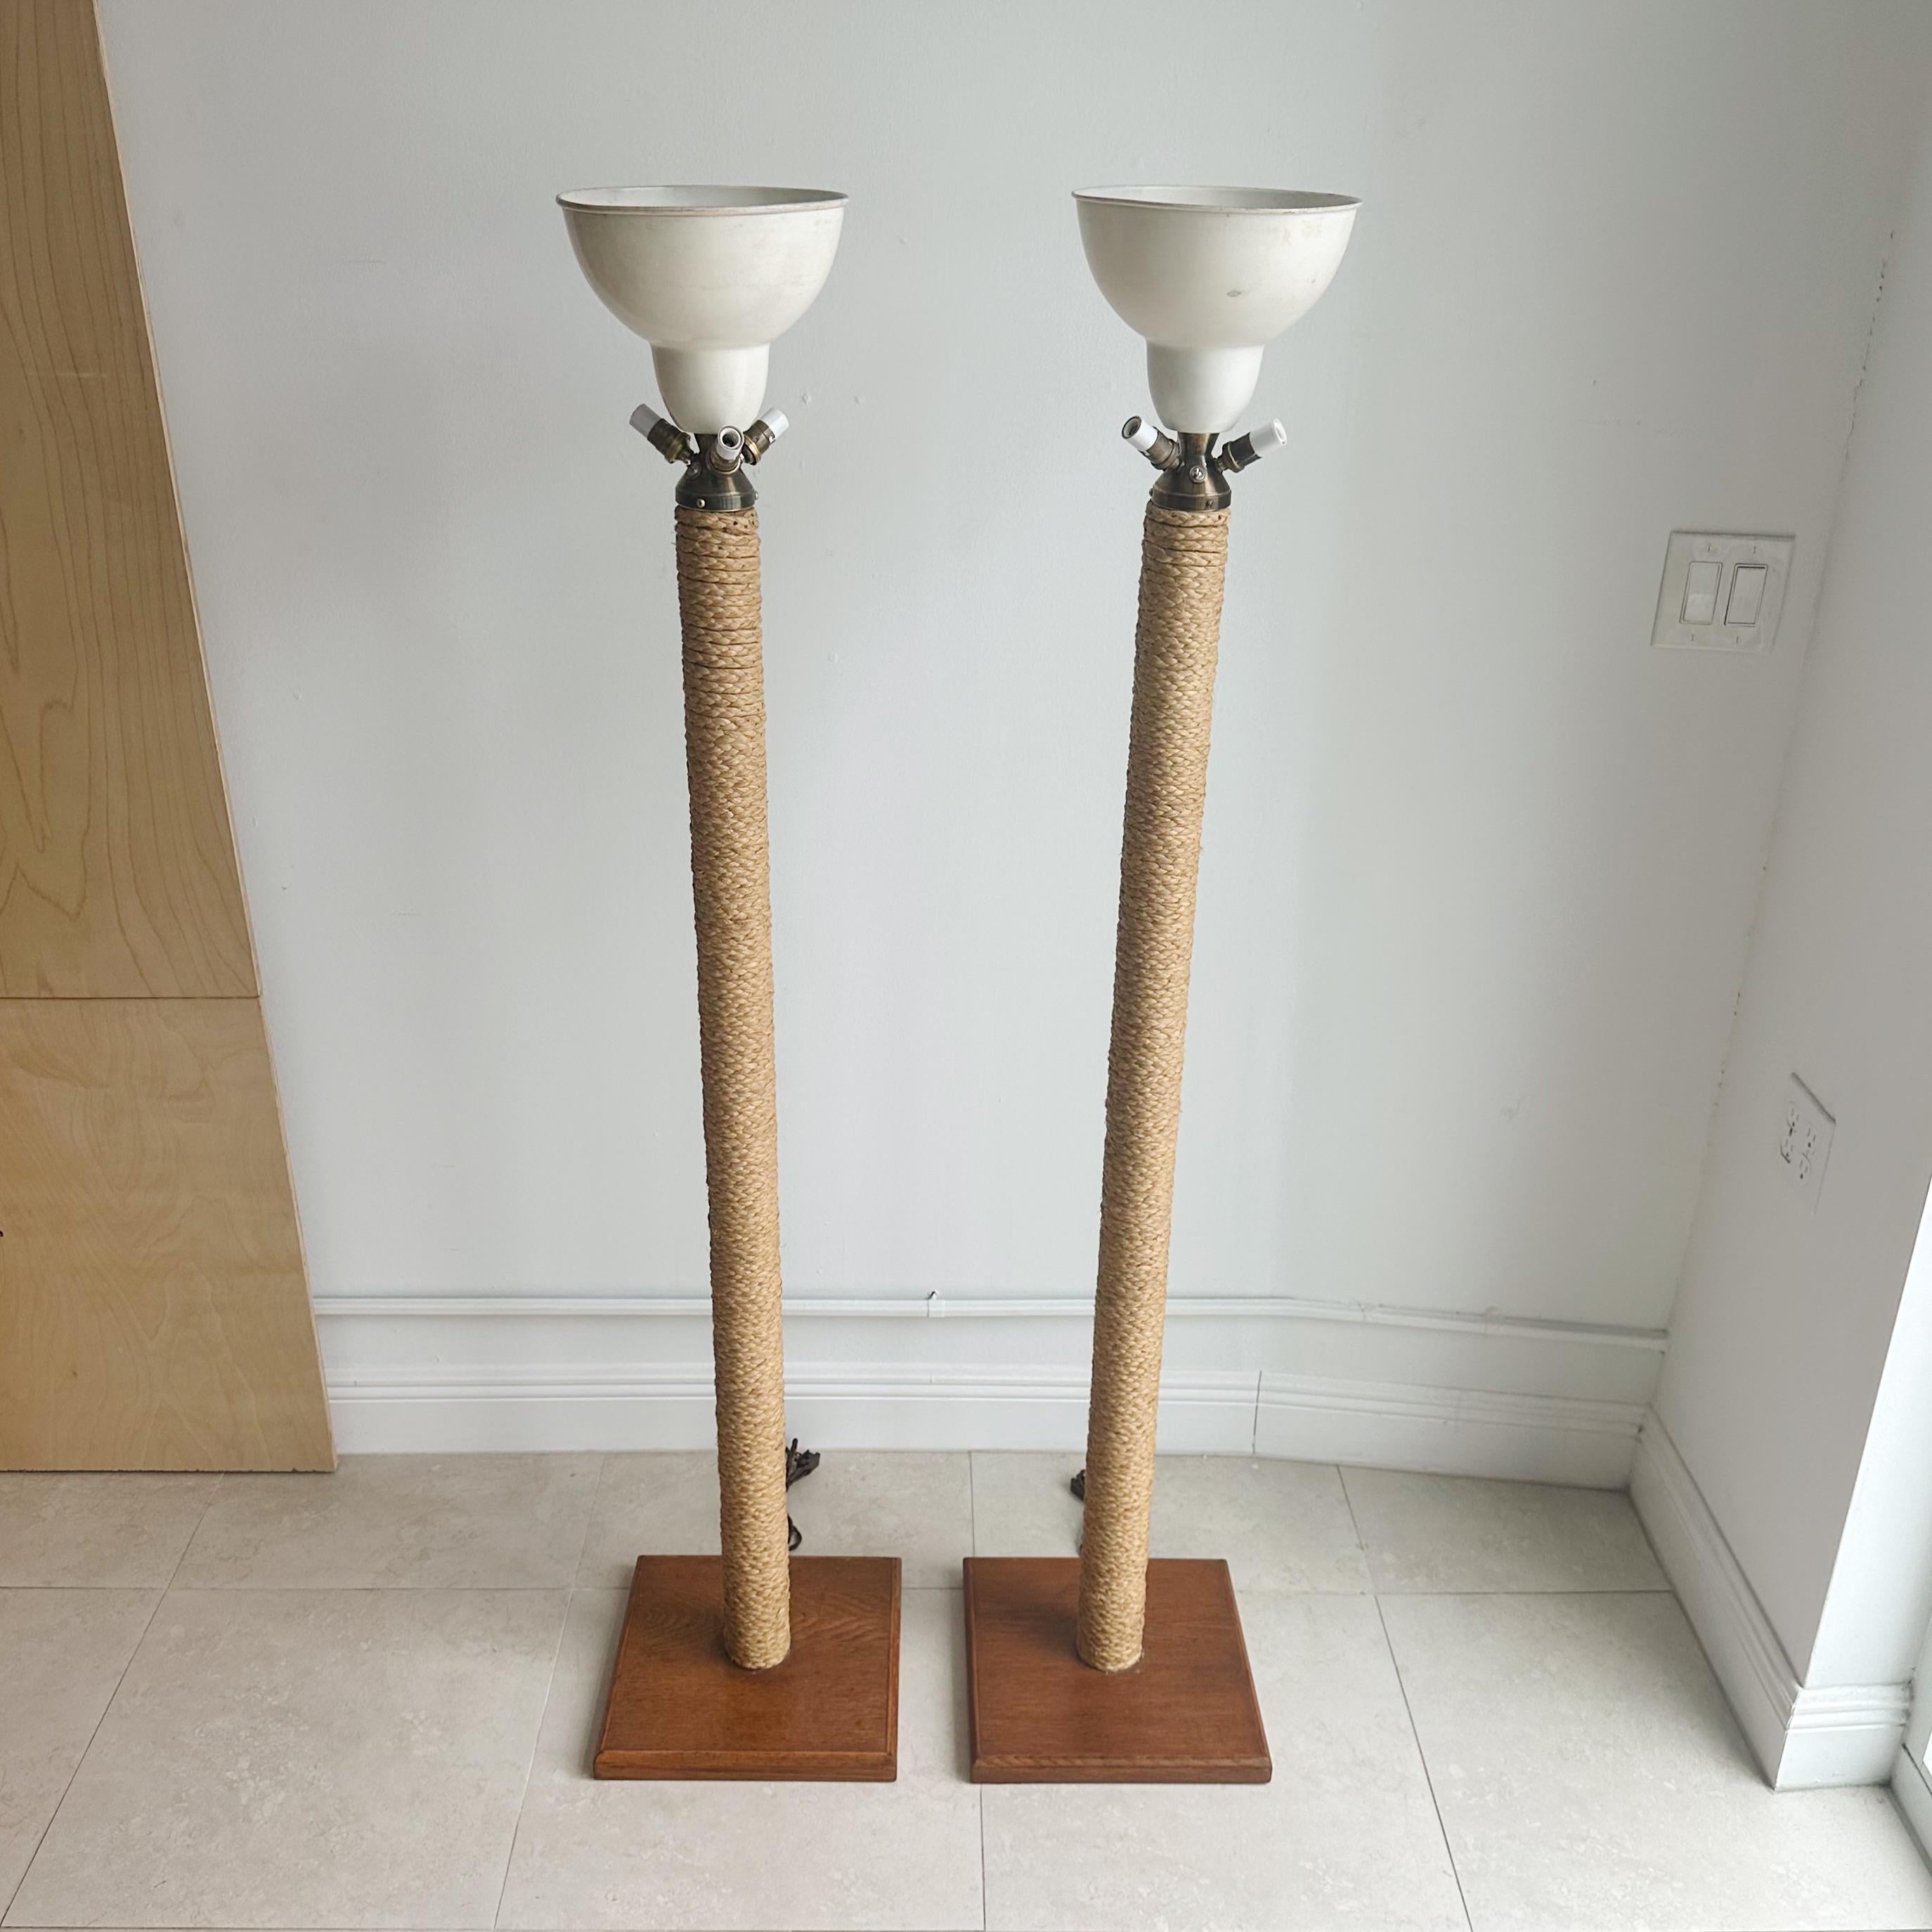 Rare Vintage Find: Pair of Adrien Audoux and Frida Minet Rope Floor Lamps from France, Circa 1950s

The lamps' distinctive feature is the skillful use of rope wrapped around the wooden frame, exuding a rustic charm that effortlessly complements